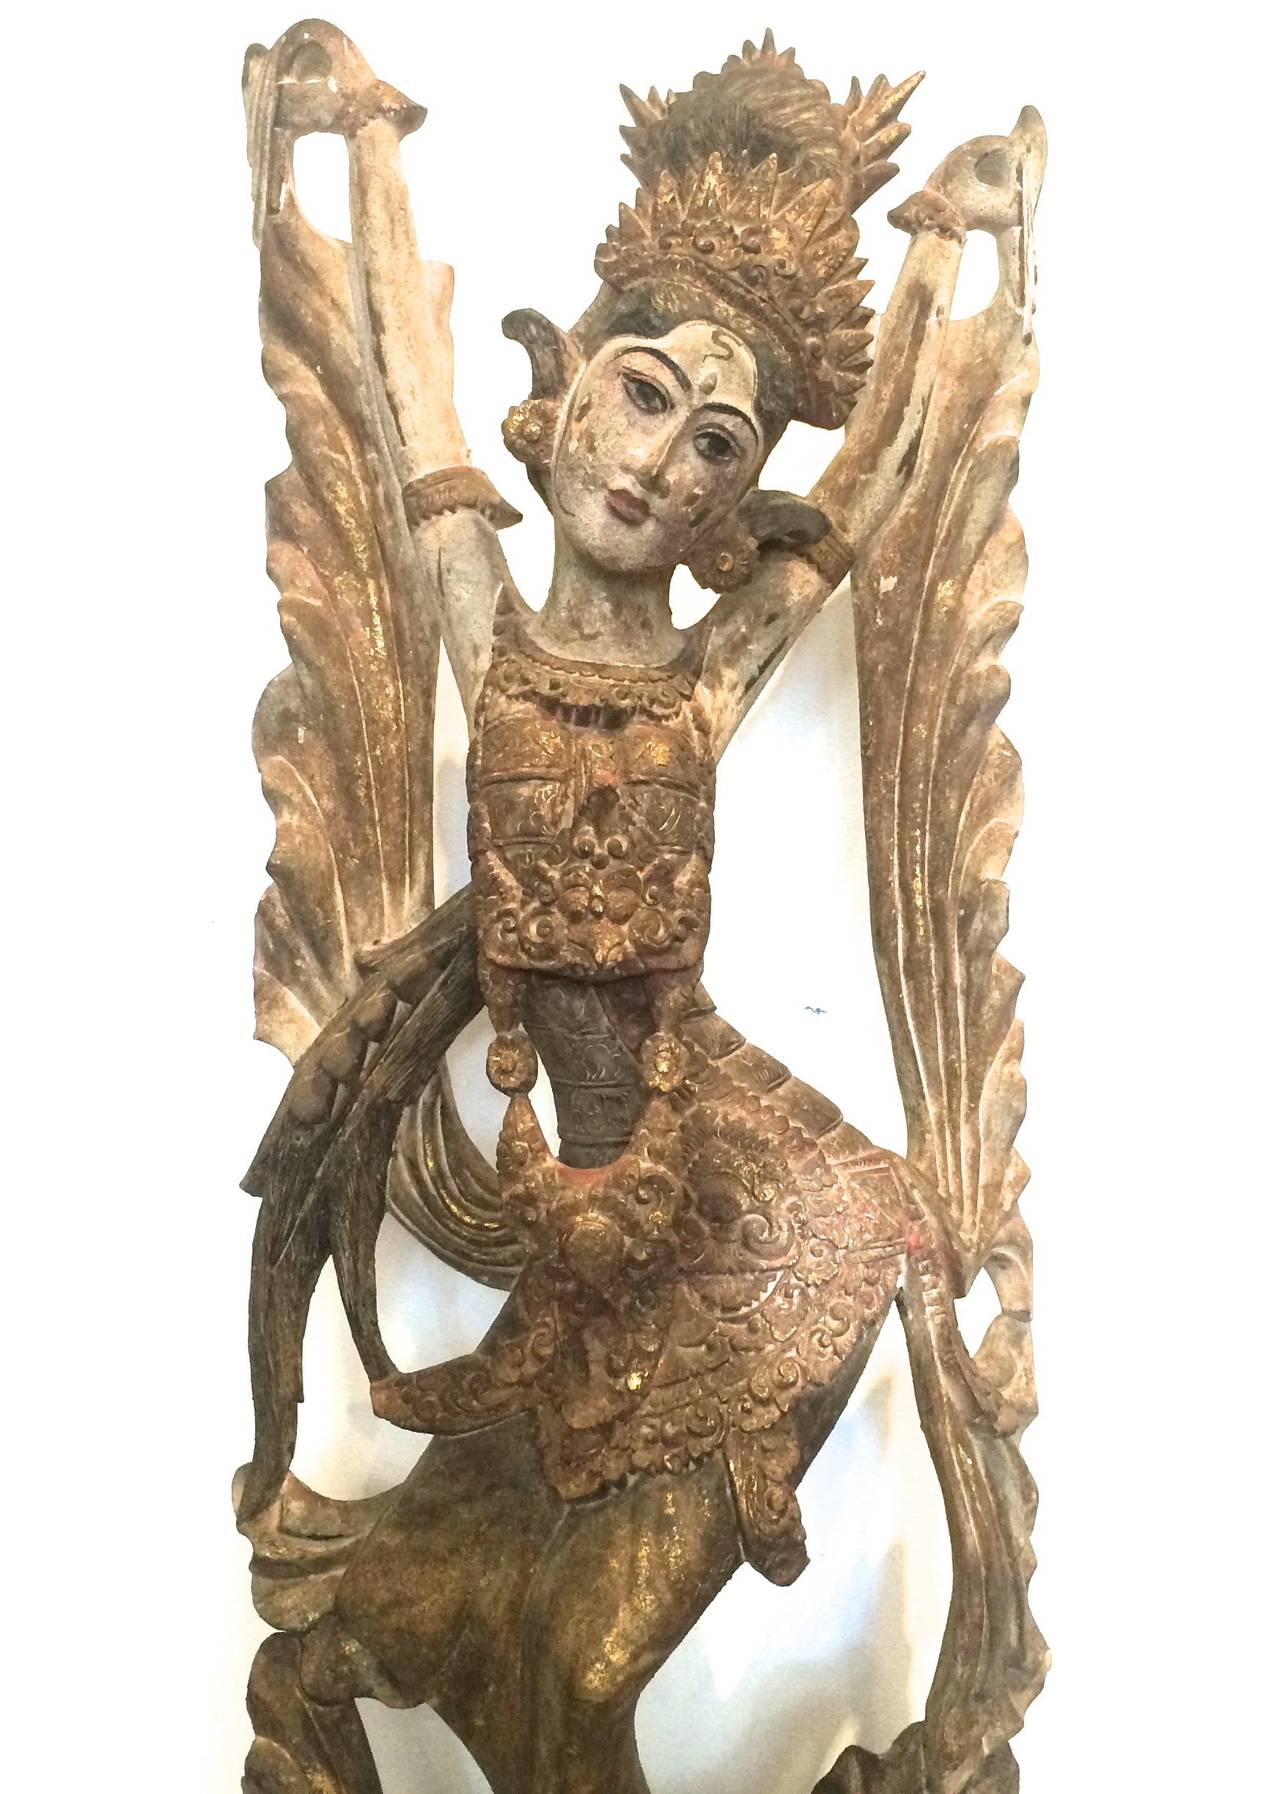 Balinese Wood Figure of a Dancer - Sculpture by Unknown